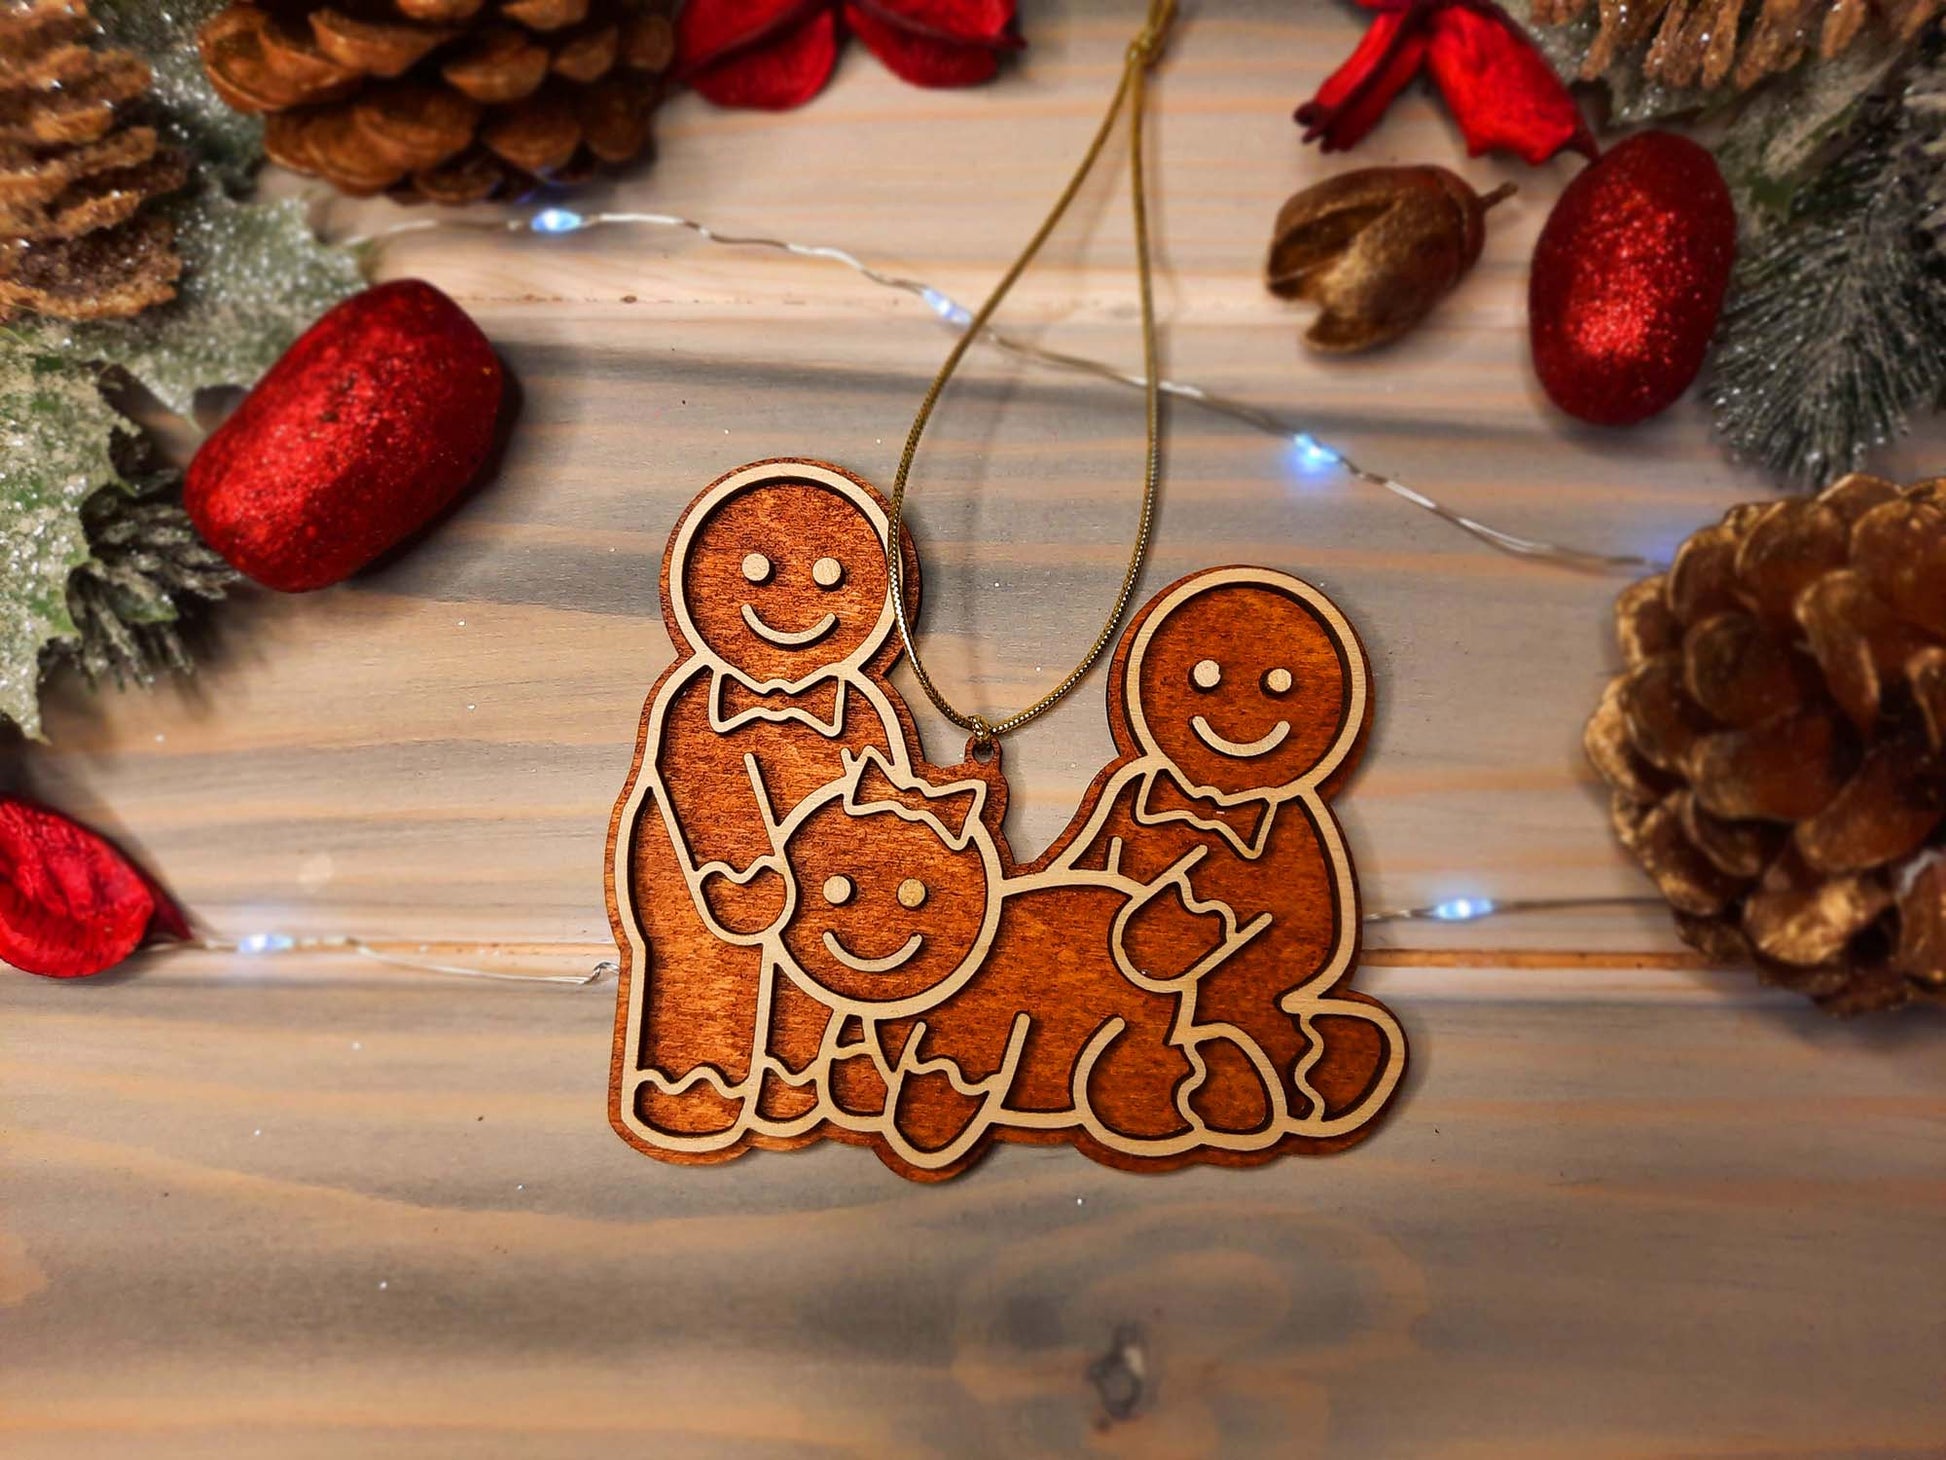 Threesome Sex Gingerbread - Christmas Decoration ver6 - PG Factory